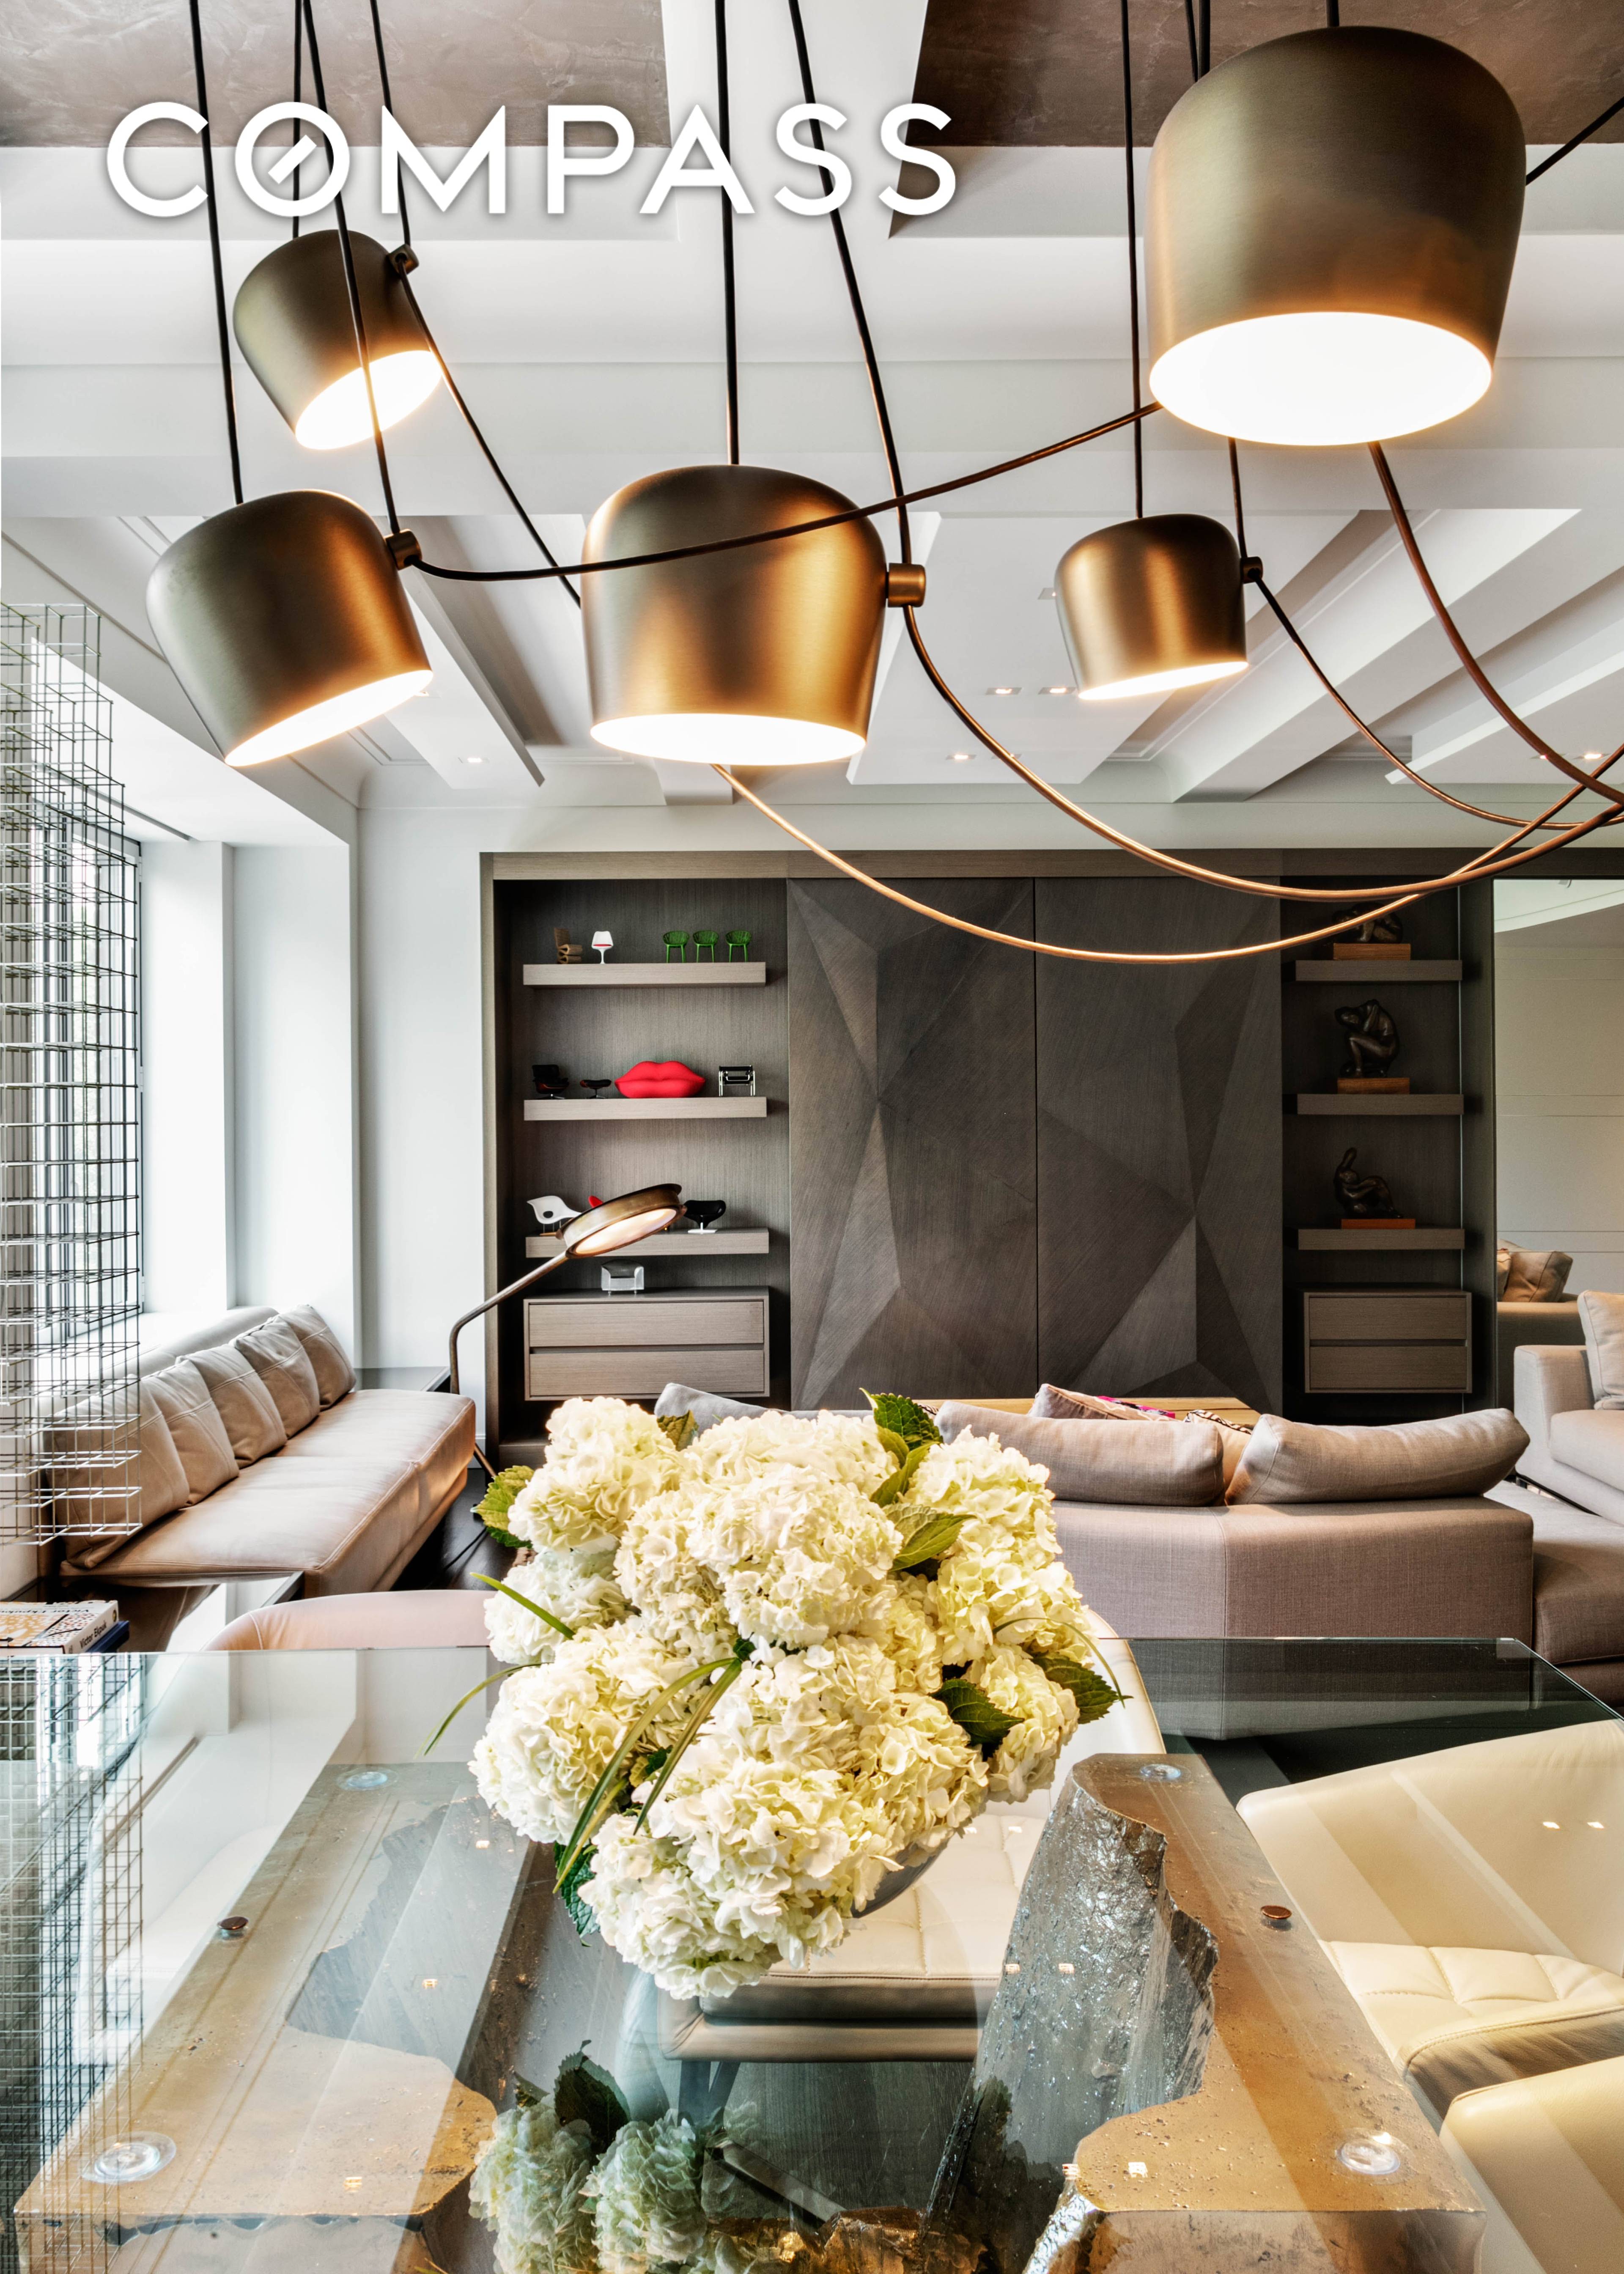 1212 Fifth Avenue is the meticulously and comprehensively renovated prewar condominium sponsored by Durst Fetner Residential with interiors by the acclaimed firm of S.